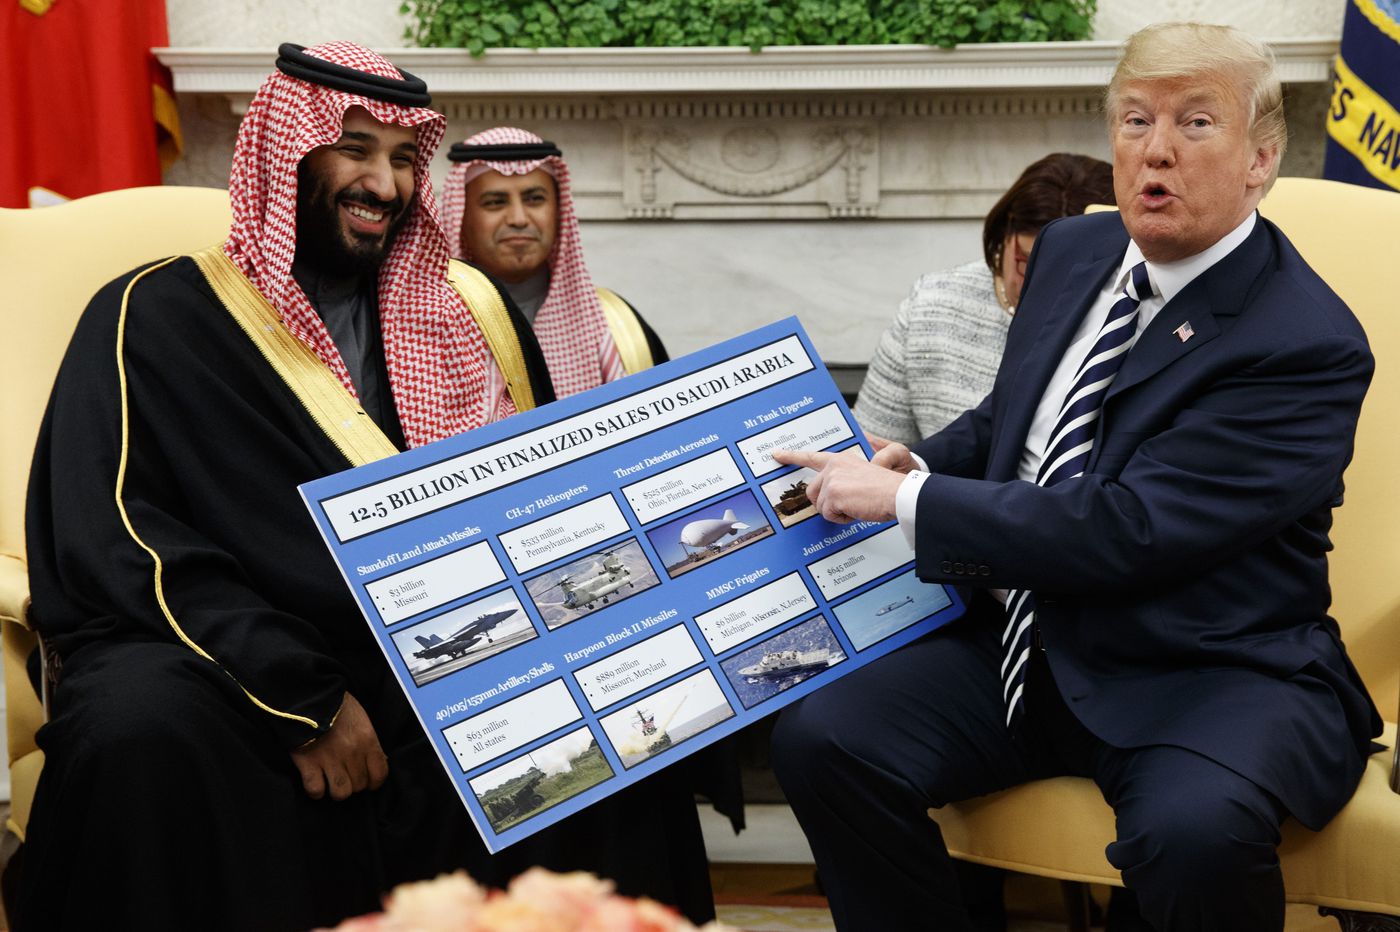 Donald Trump and Mohammed bin Salman sit on a couch together, looking at a large board with information on it.